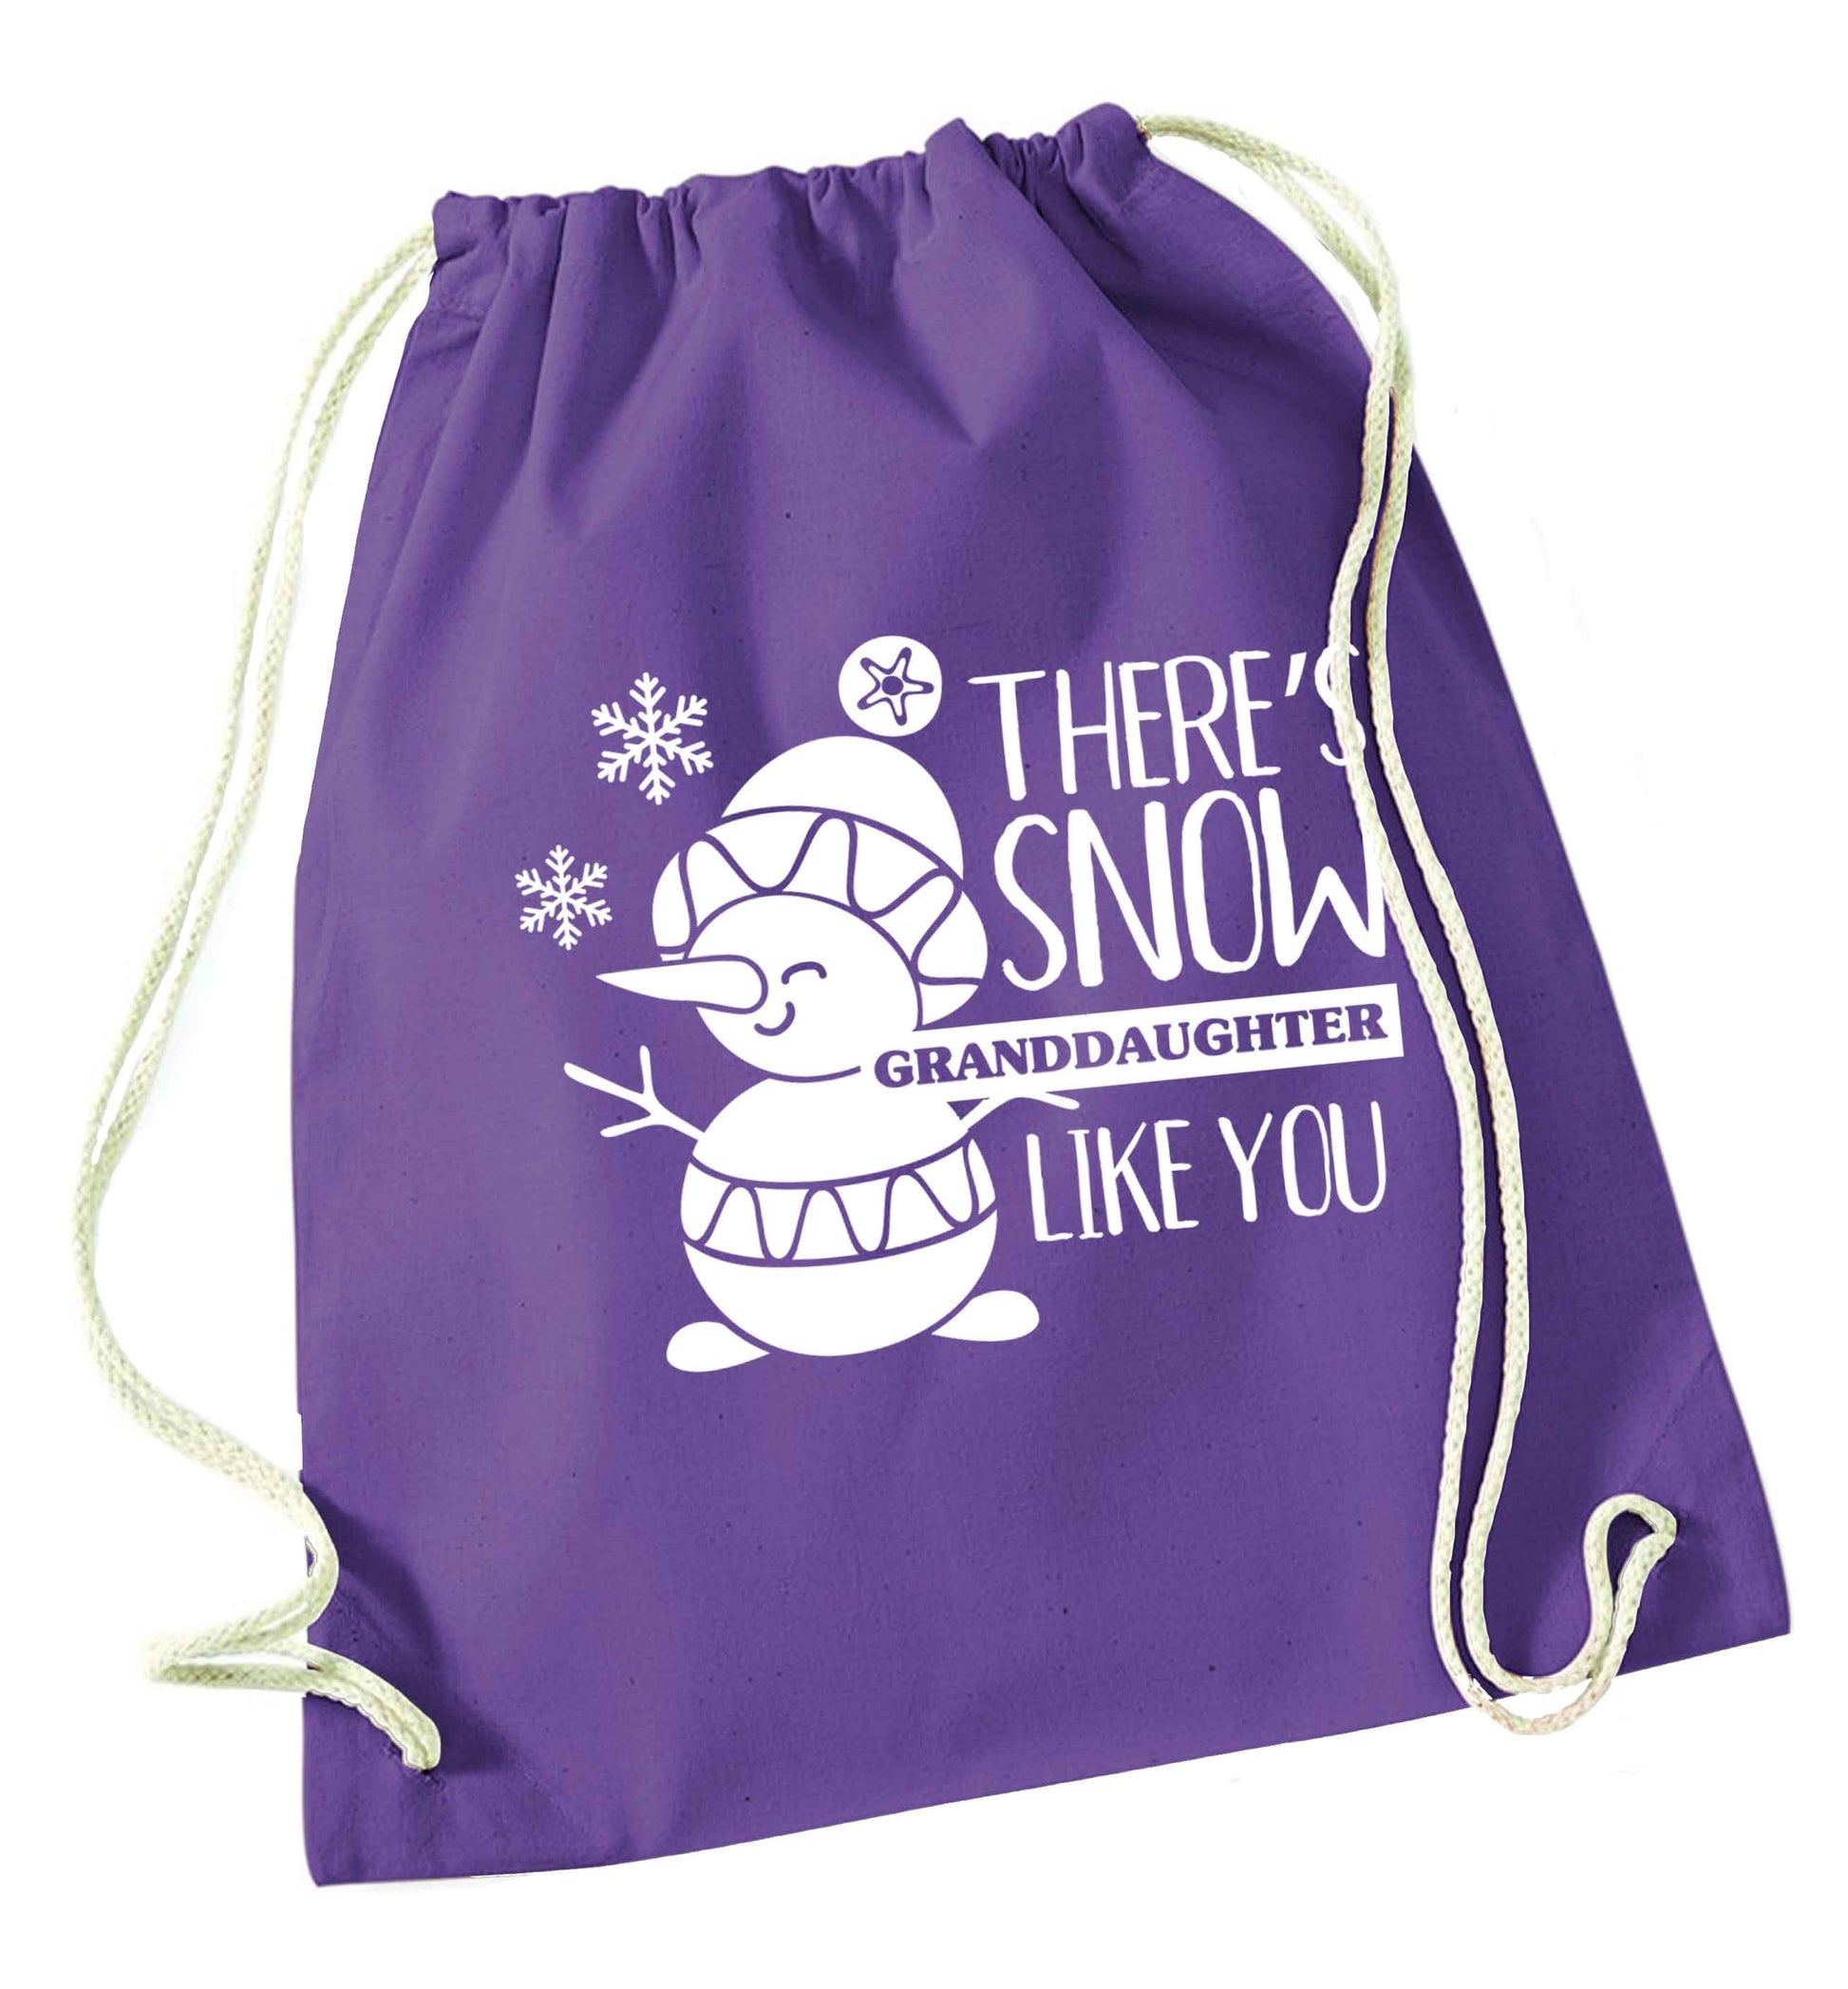 There's snow granddaughter like you purple drawstring bag